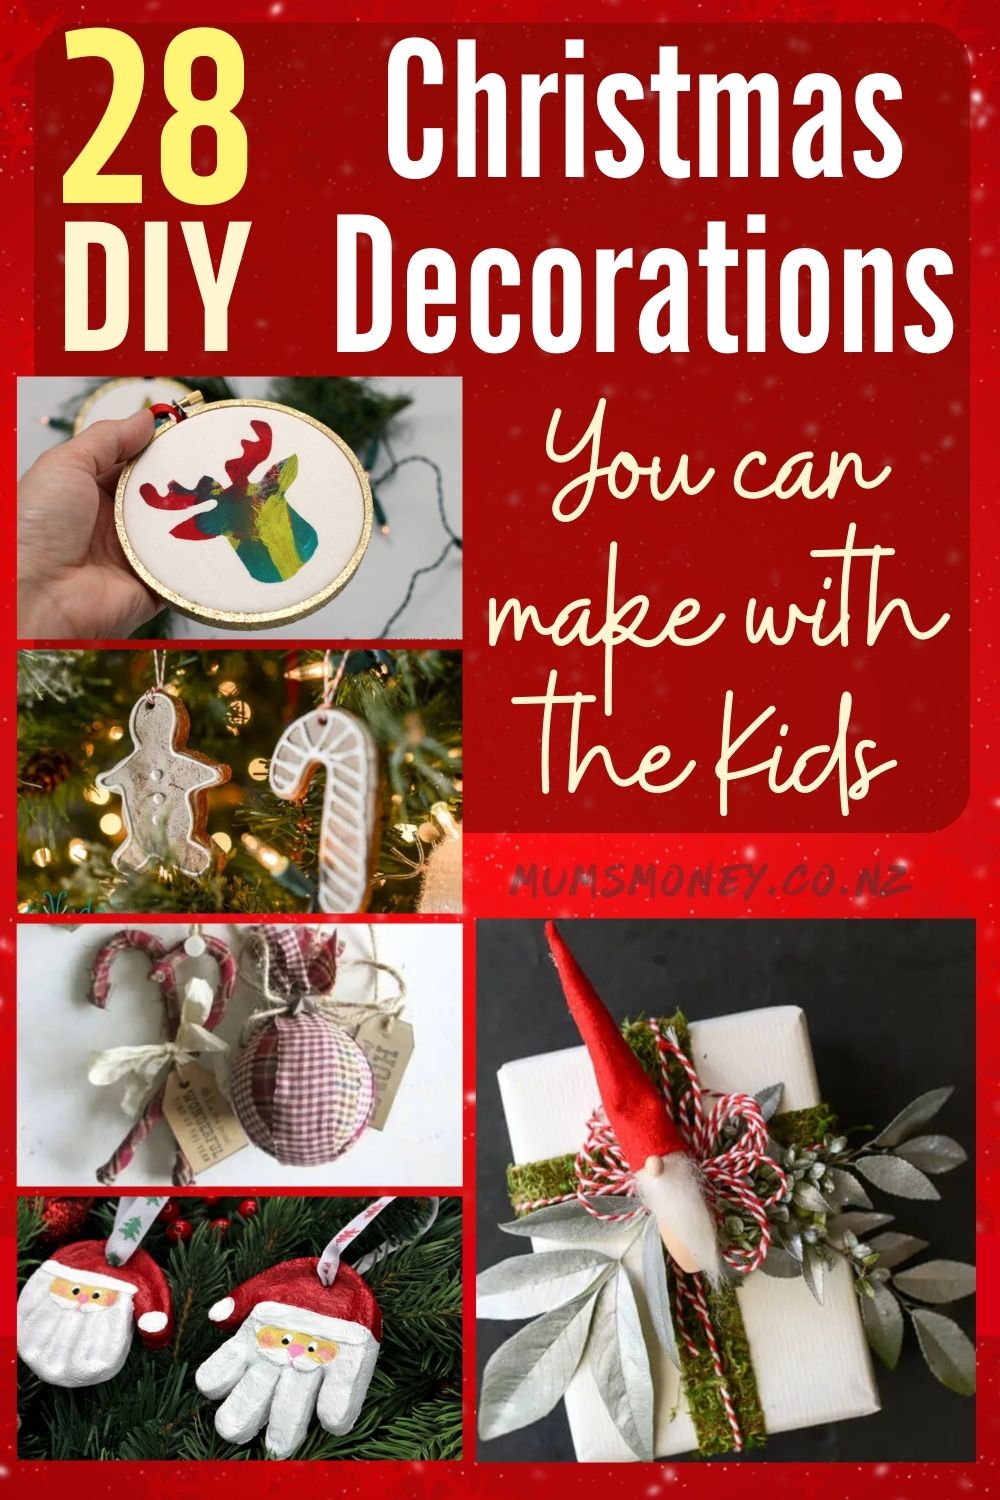 28 DIY Christmas Decorations You Can Make With the Kids Pin Image